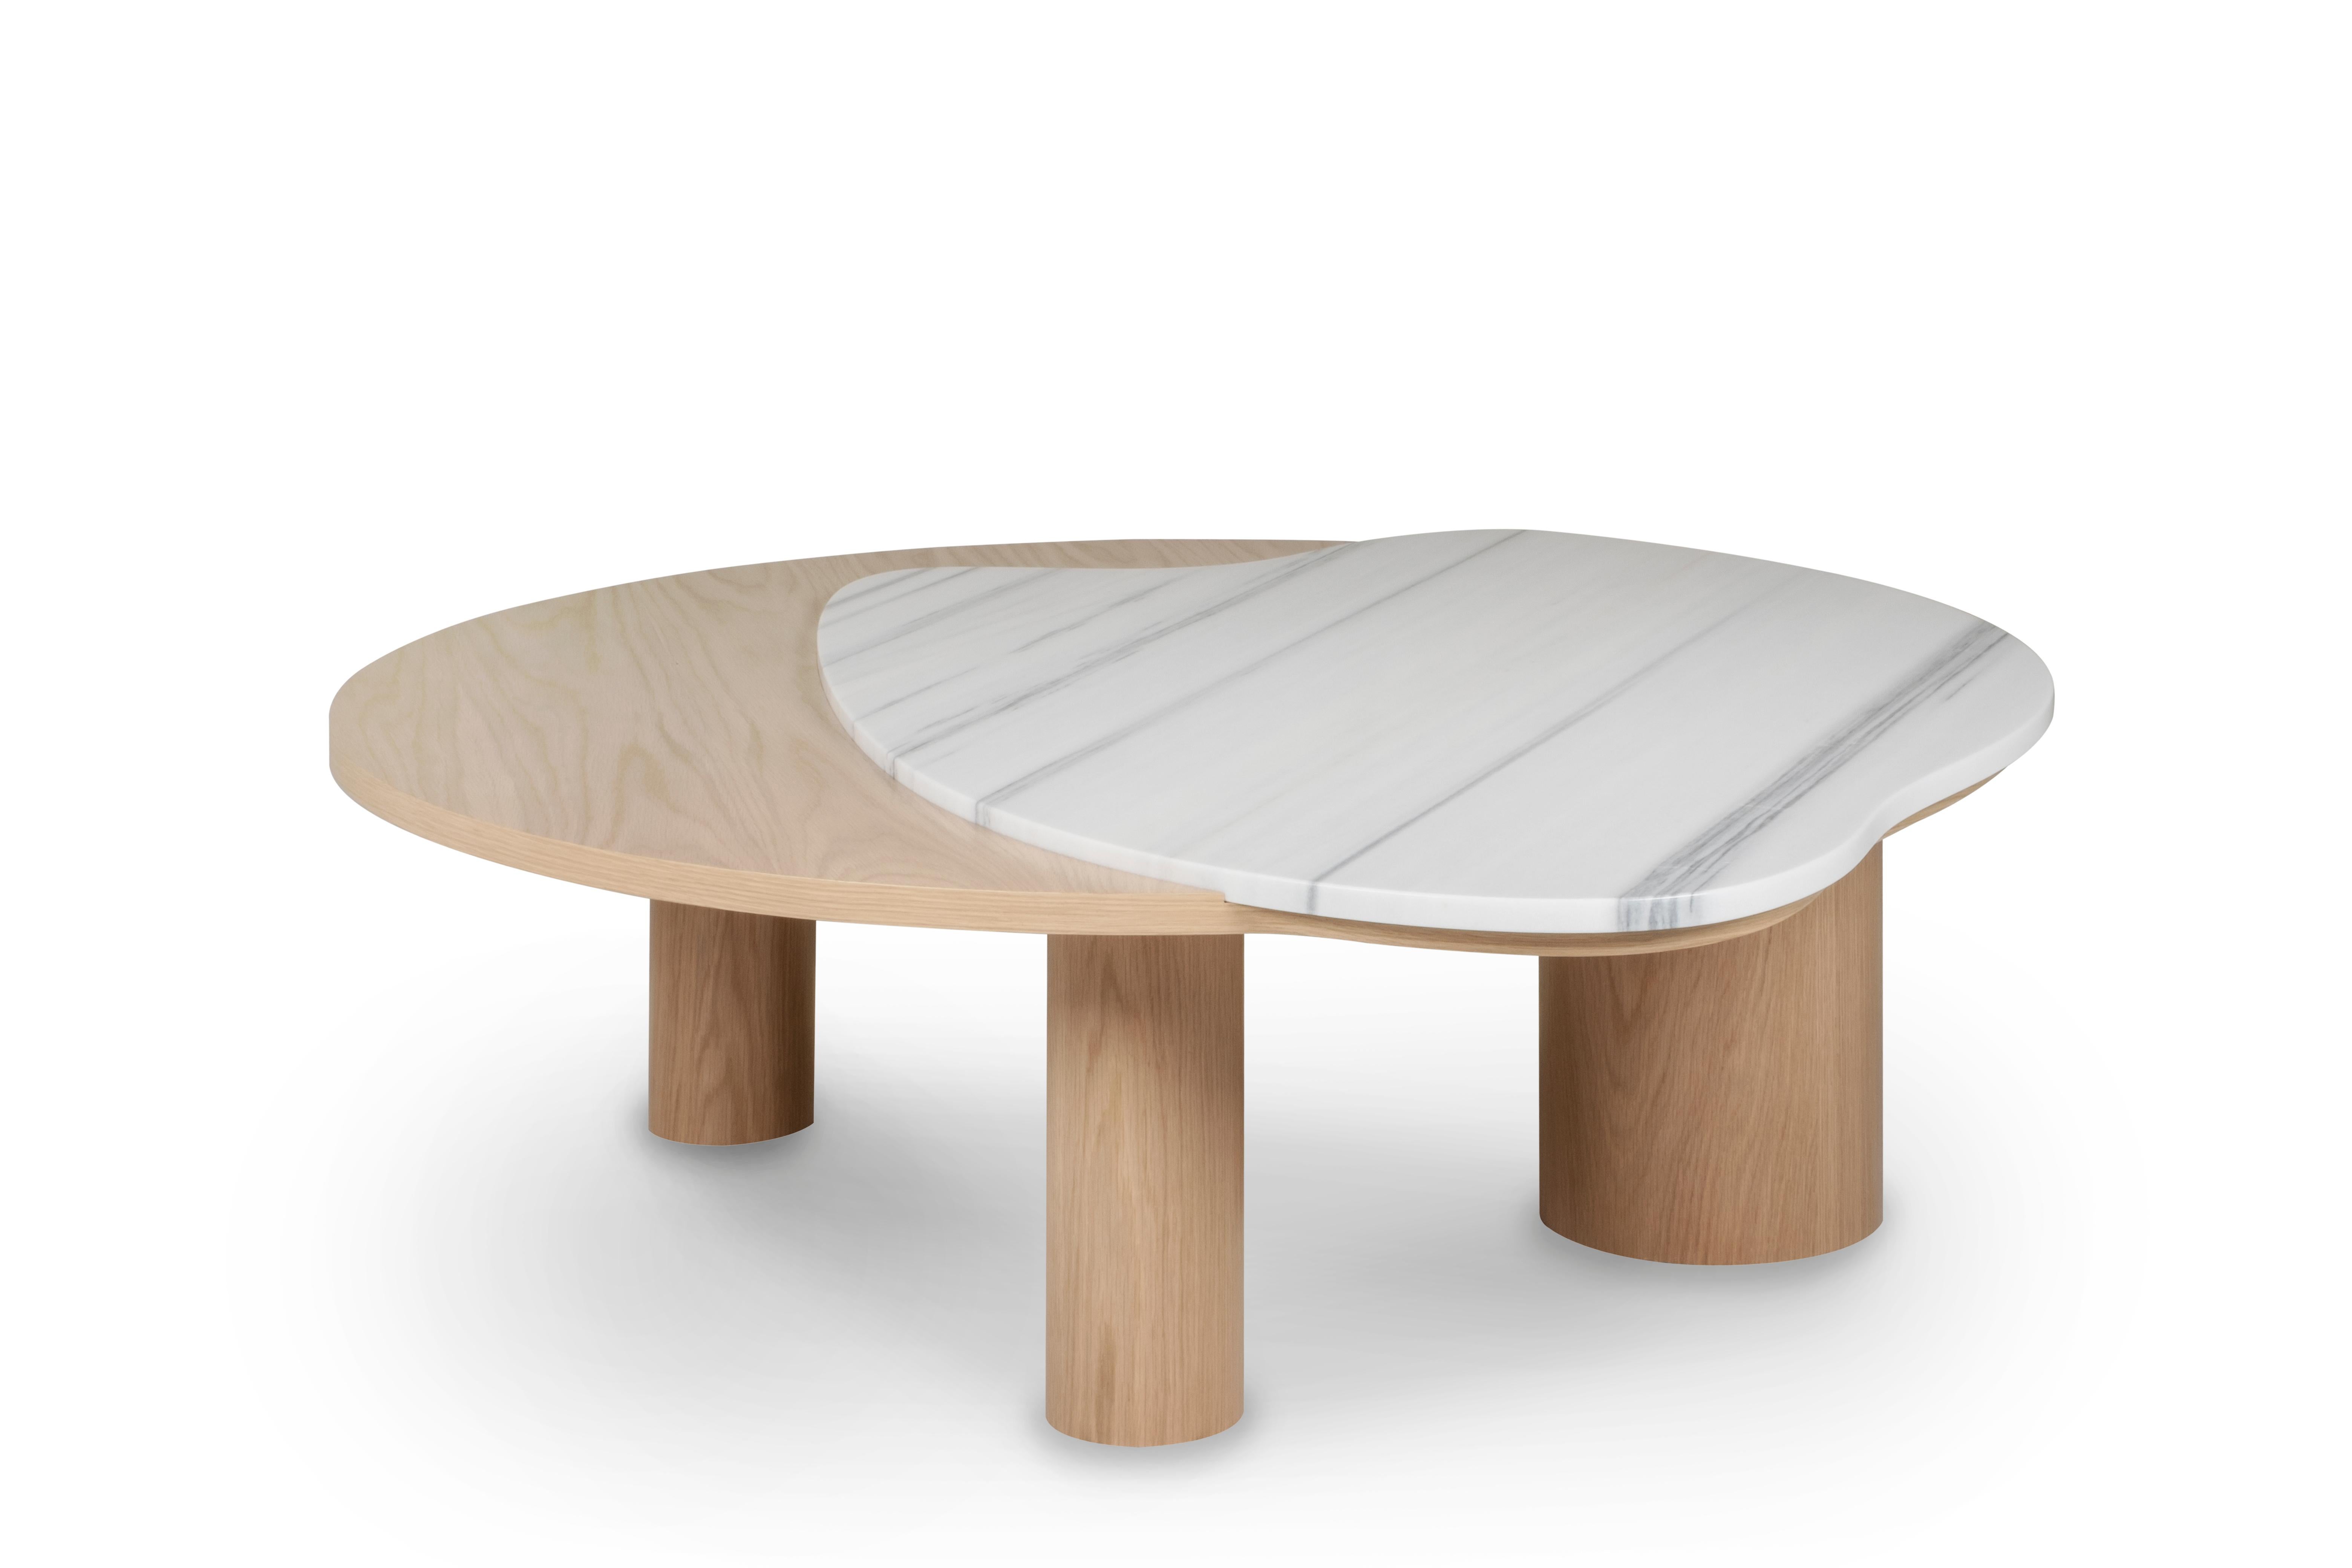 Portuguese Modern Bordeira Coffee Table, Lasa Marble, Handmade in Portugal by Greenapple For Sale